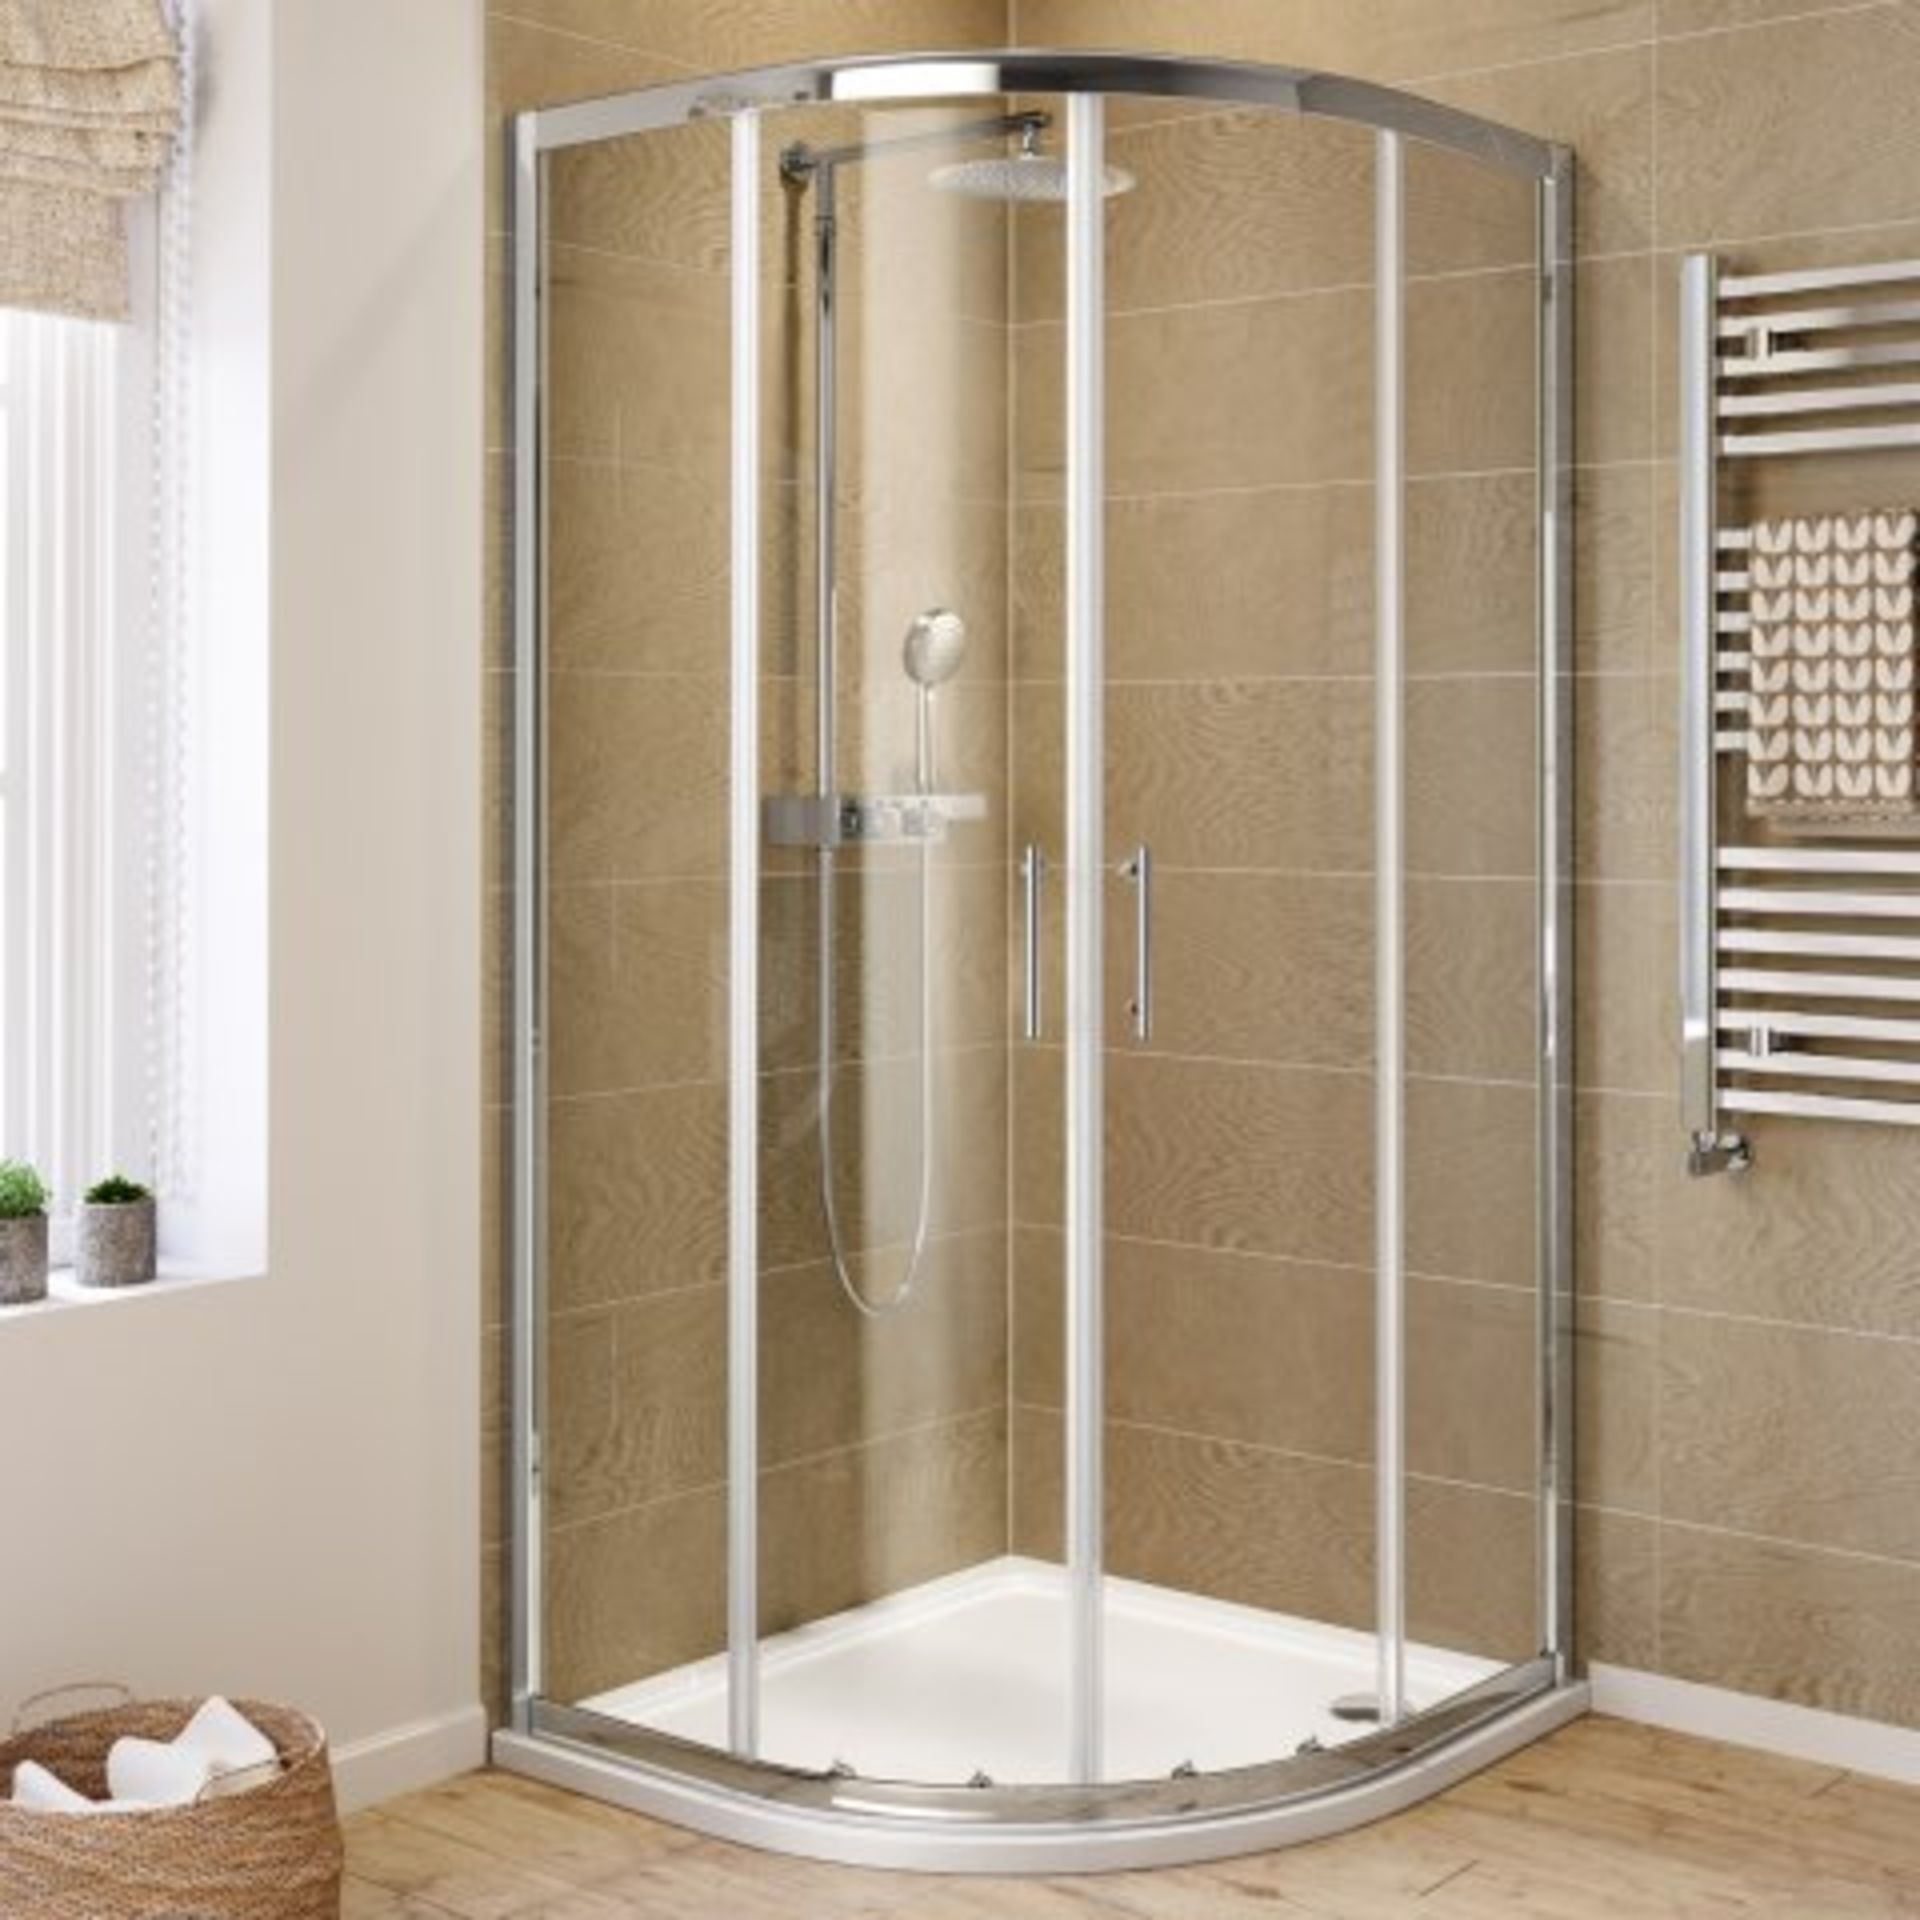 (P7) Pallet To Contain 12 X Brand New 800Mm Fully Framed High Quality Quadrant Shower Enclosures.